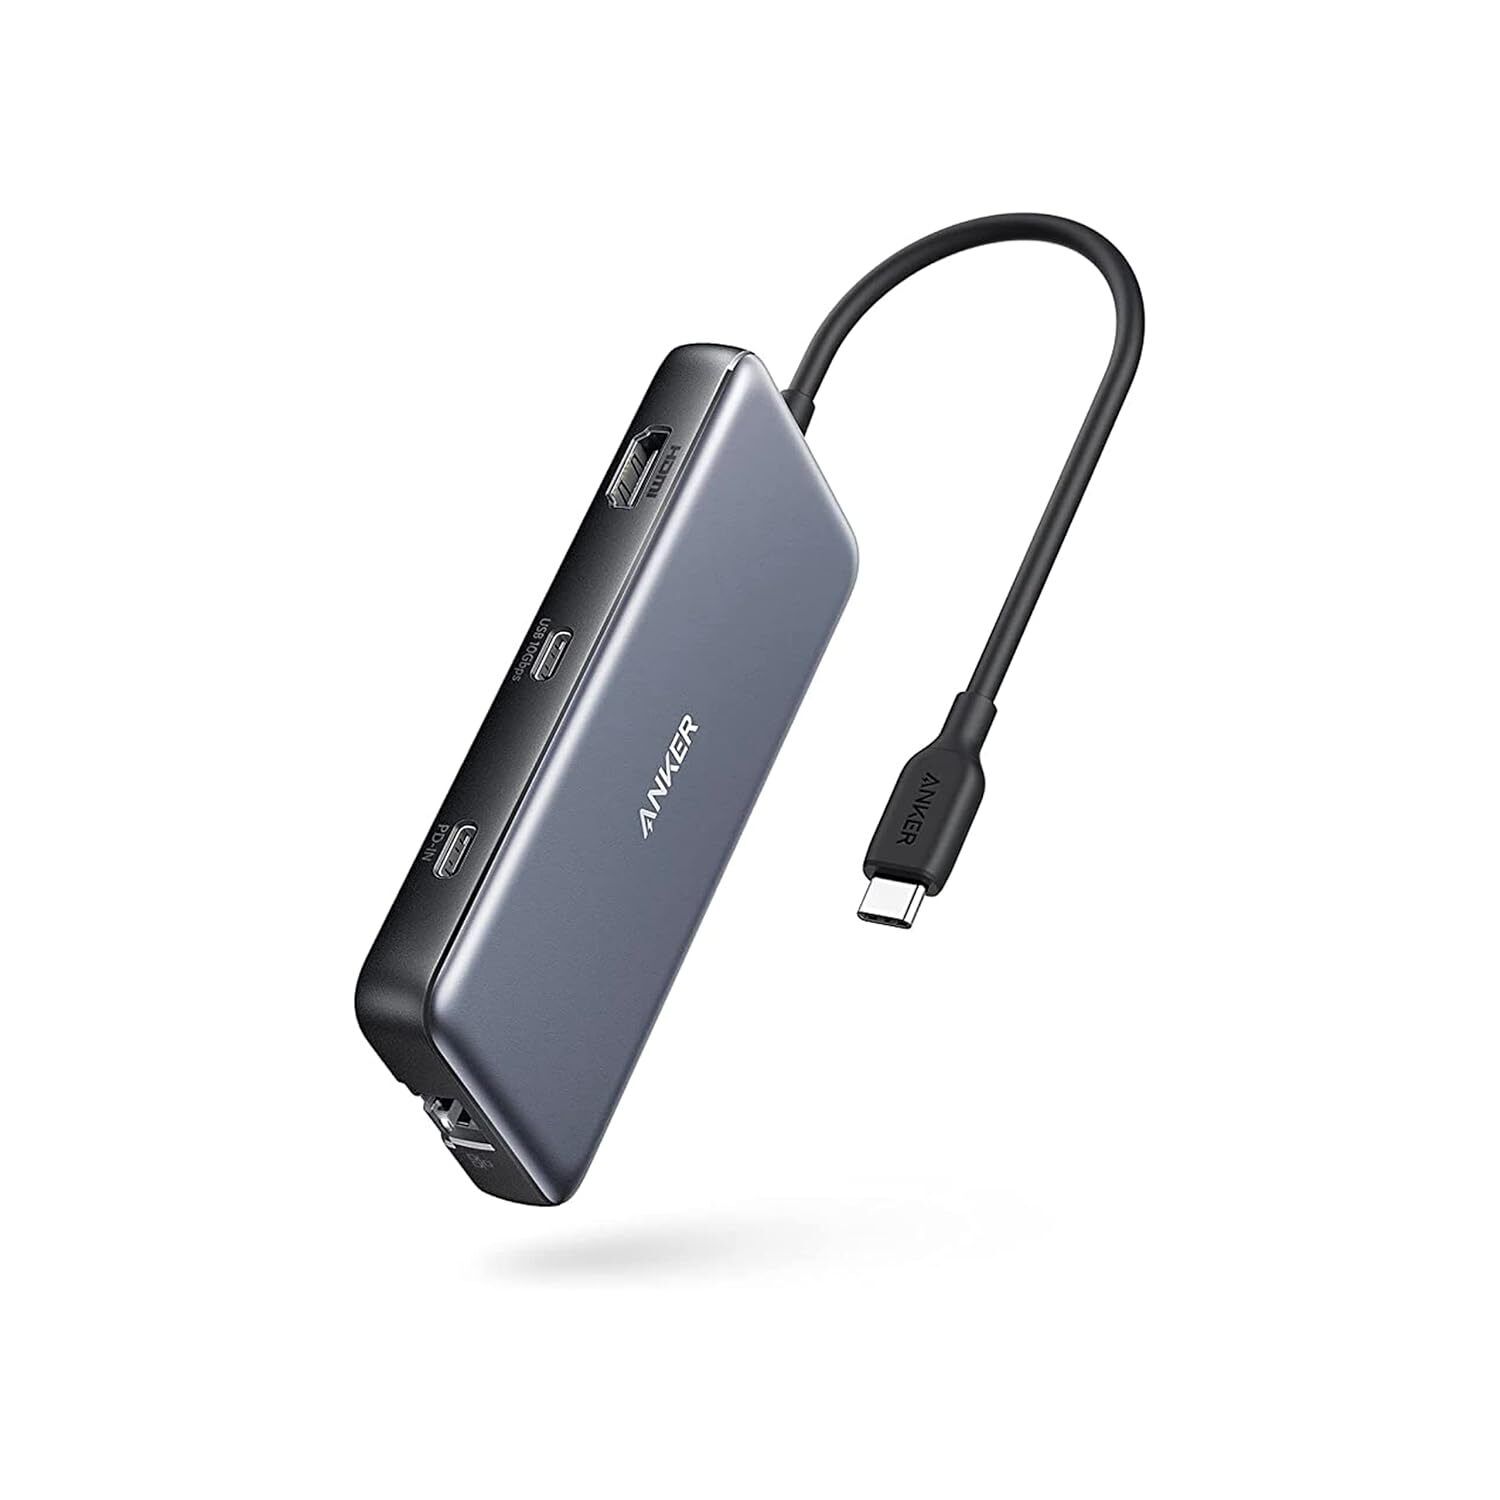 Anker USB C Hub, 555 USB-C Hub (8-in-1), with 100W Power Delivery, 4K 60Hz HDM